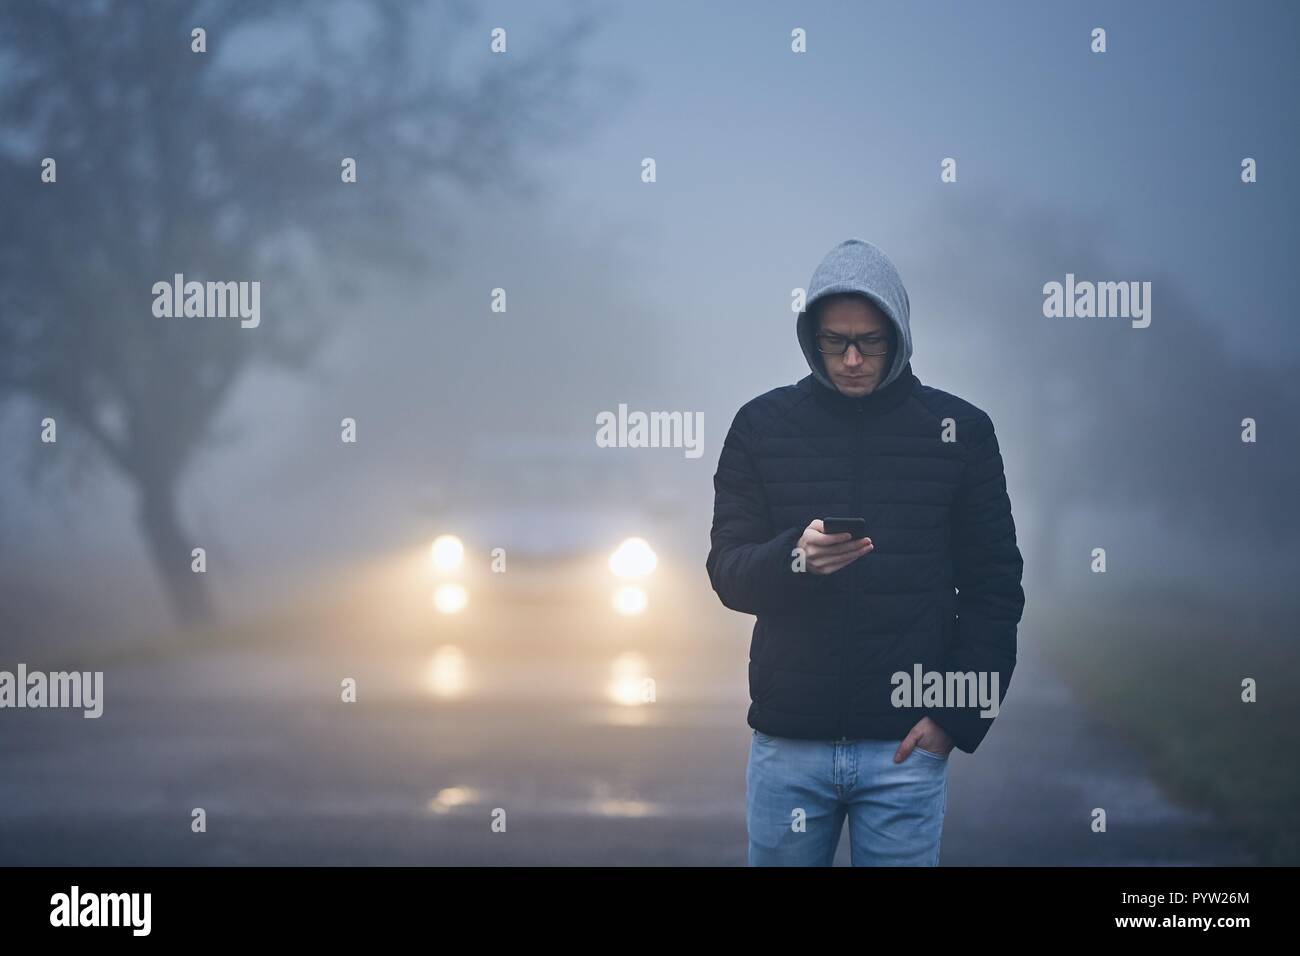 Young man walking on road and using phone. Car approaching in thick fog. Stock Photo